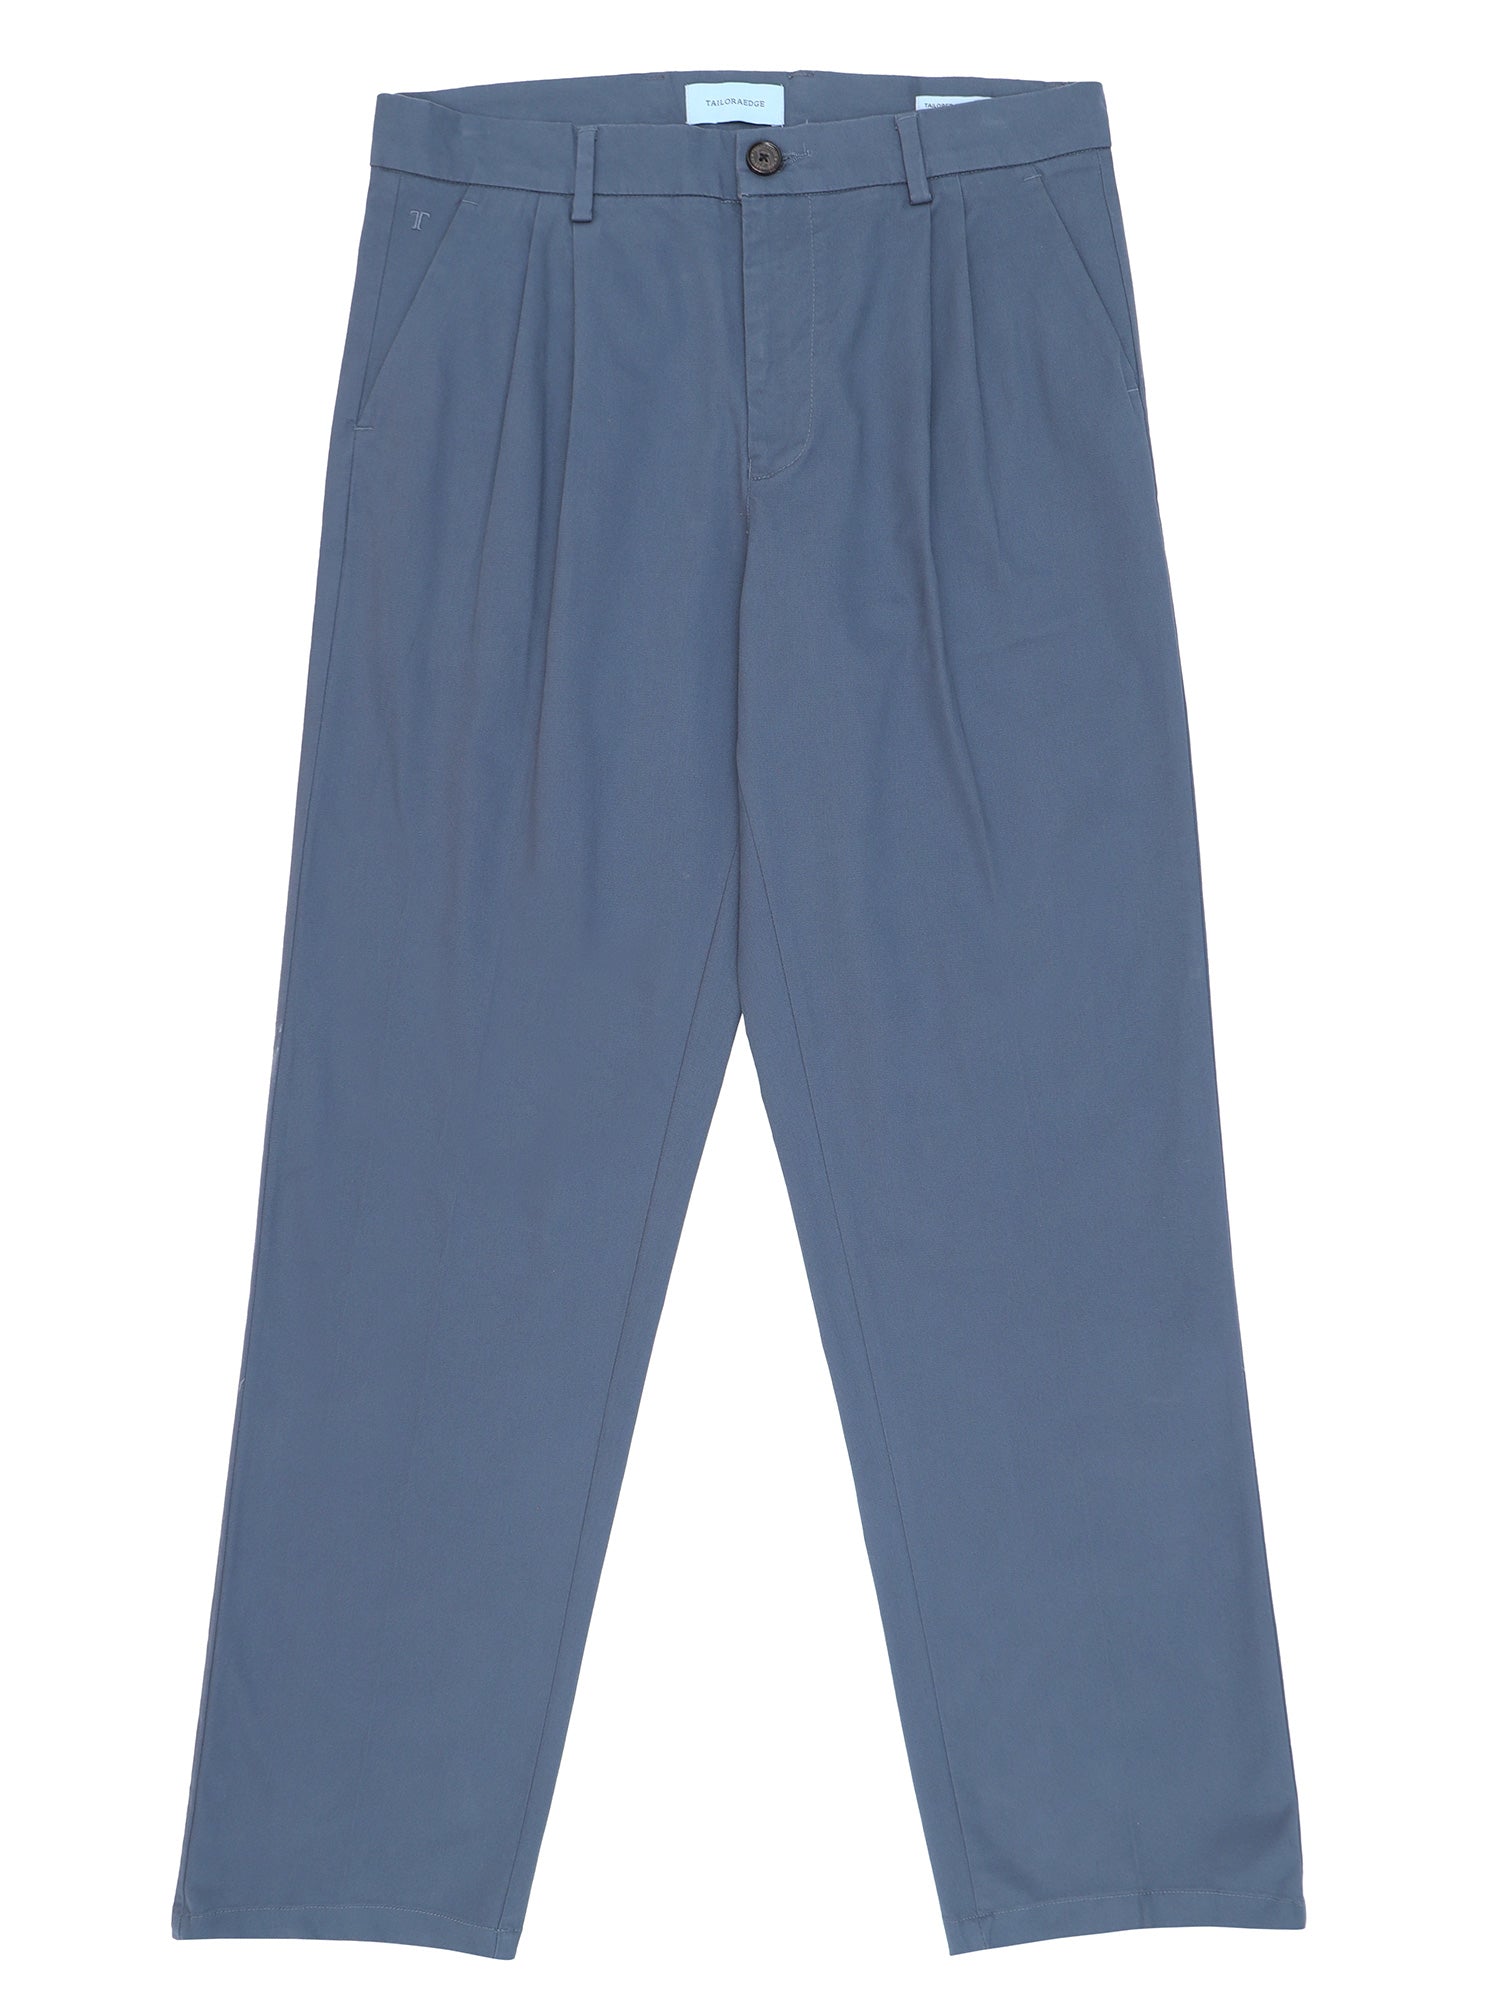 Duca Double Pleated Aqua Blue Relaxed Pant